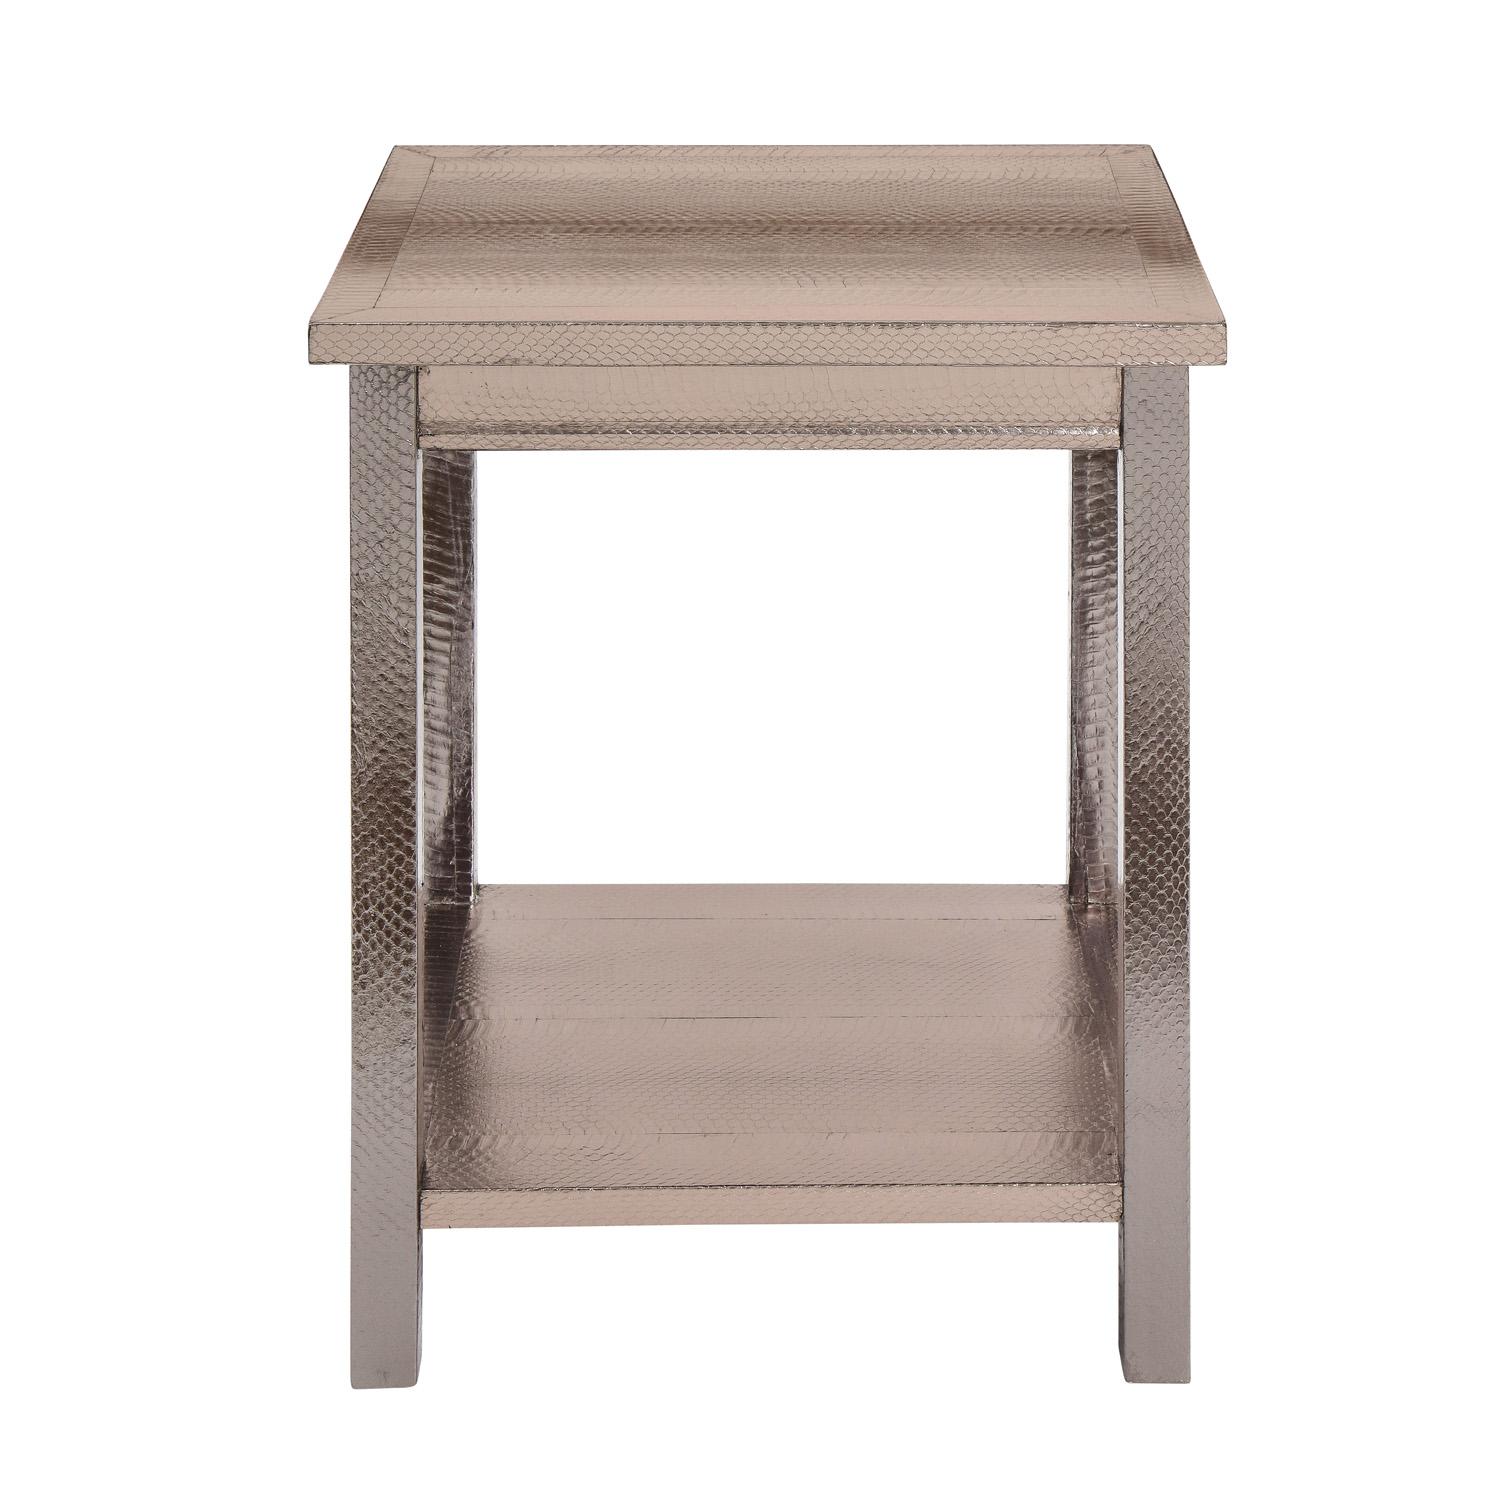 2-tier side table in metallic platinum color python by Evan Lobel for Lobel Originals, American 2021. This table is meticulously crafted and the color is very glamorous.